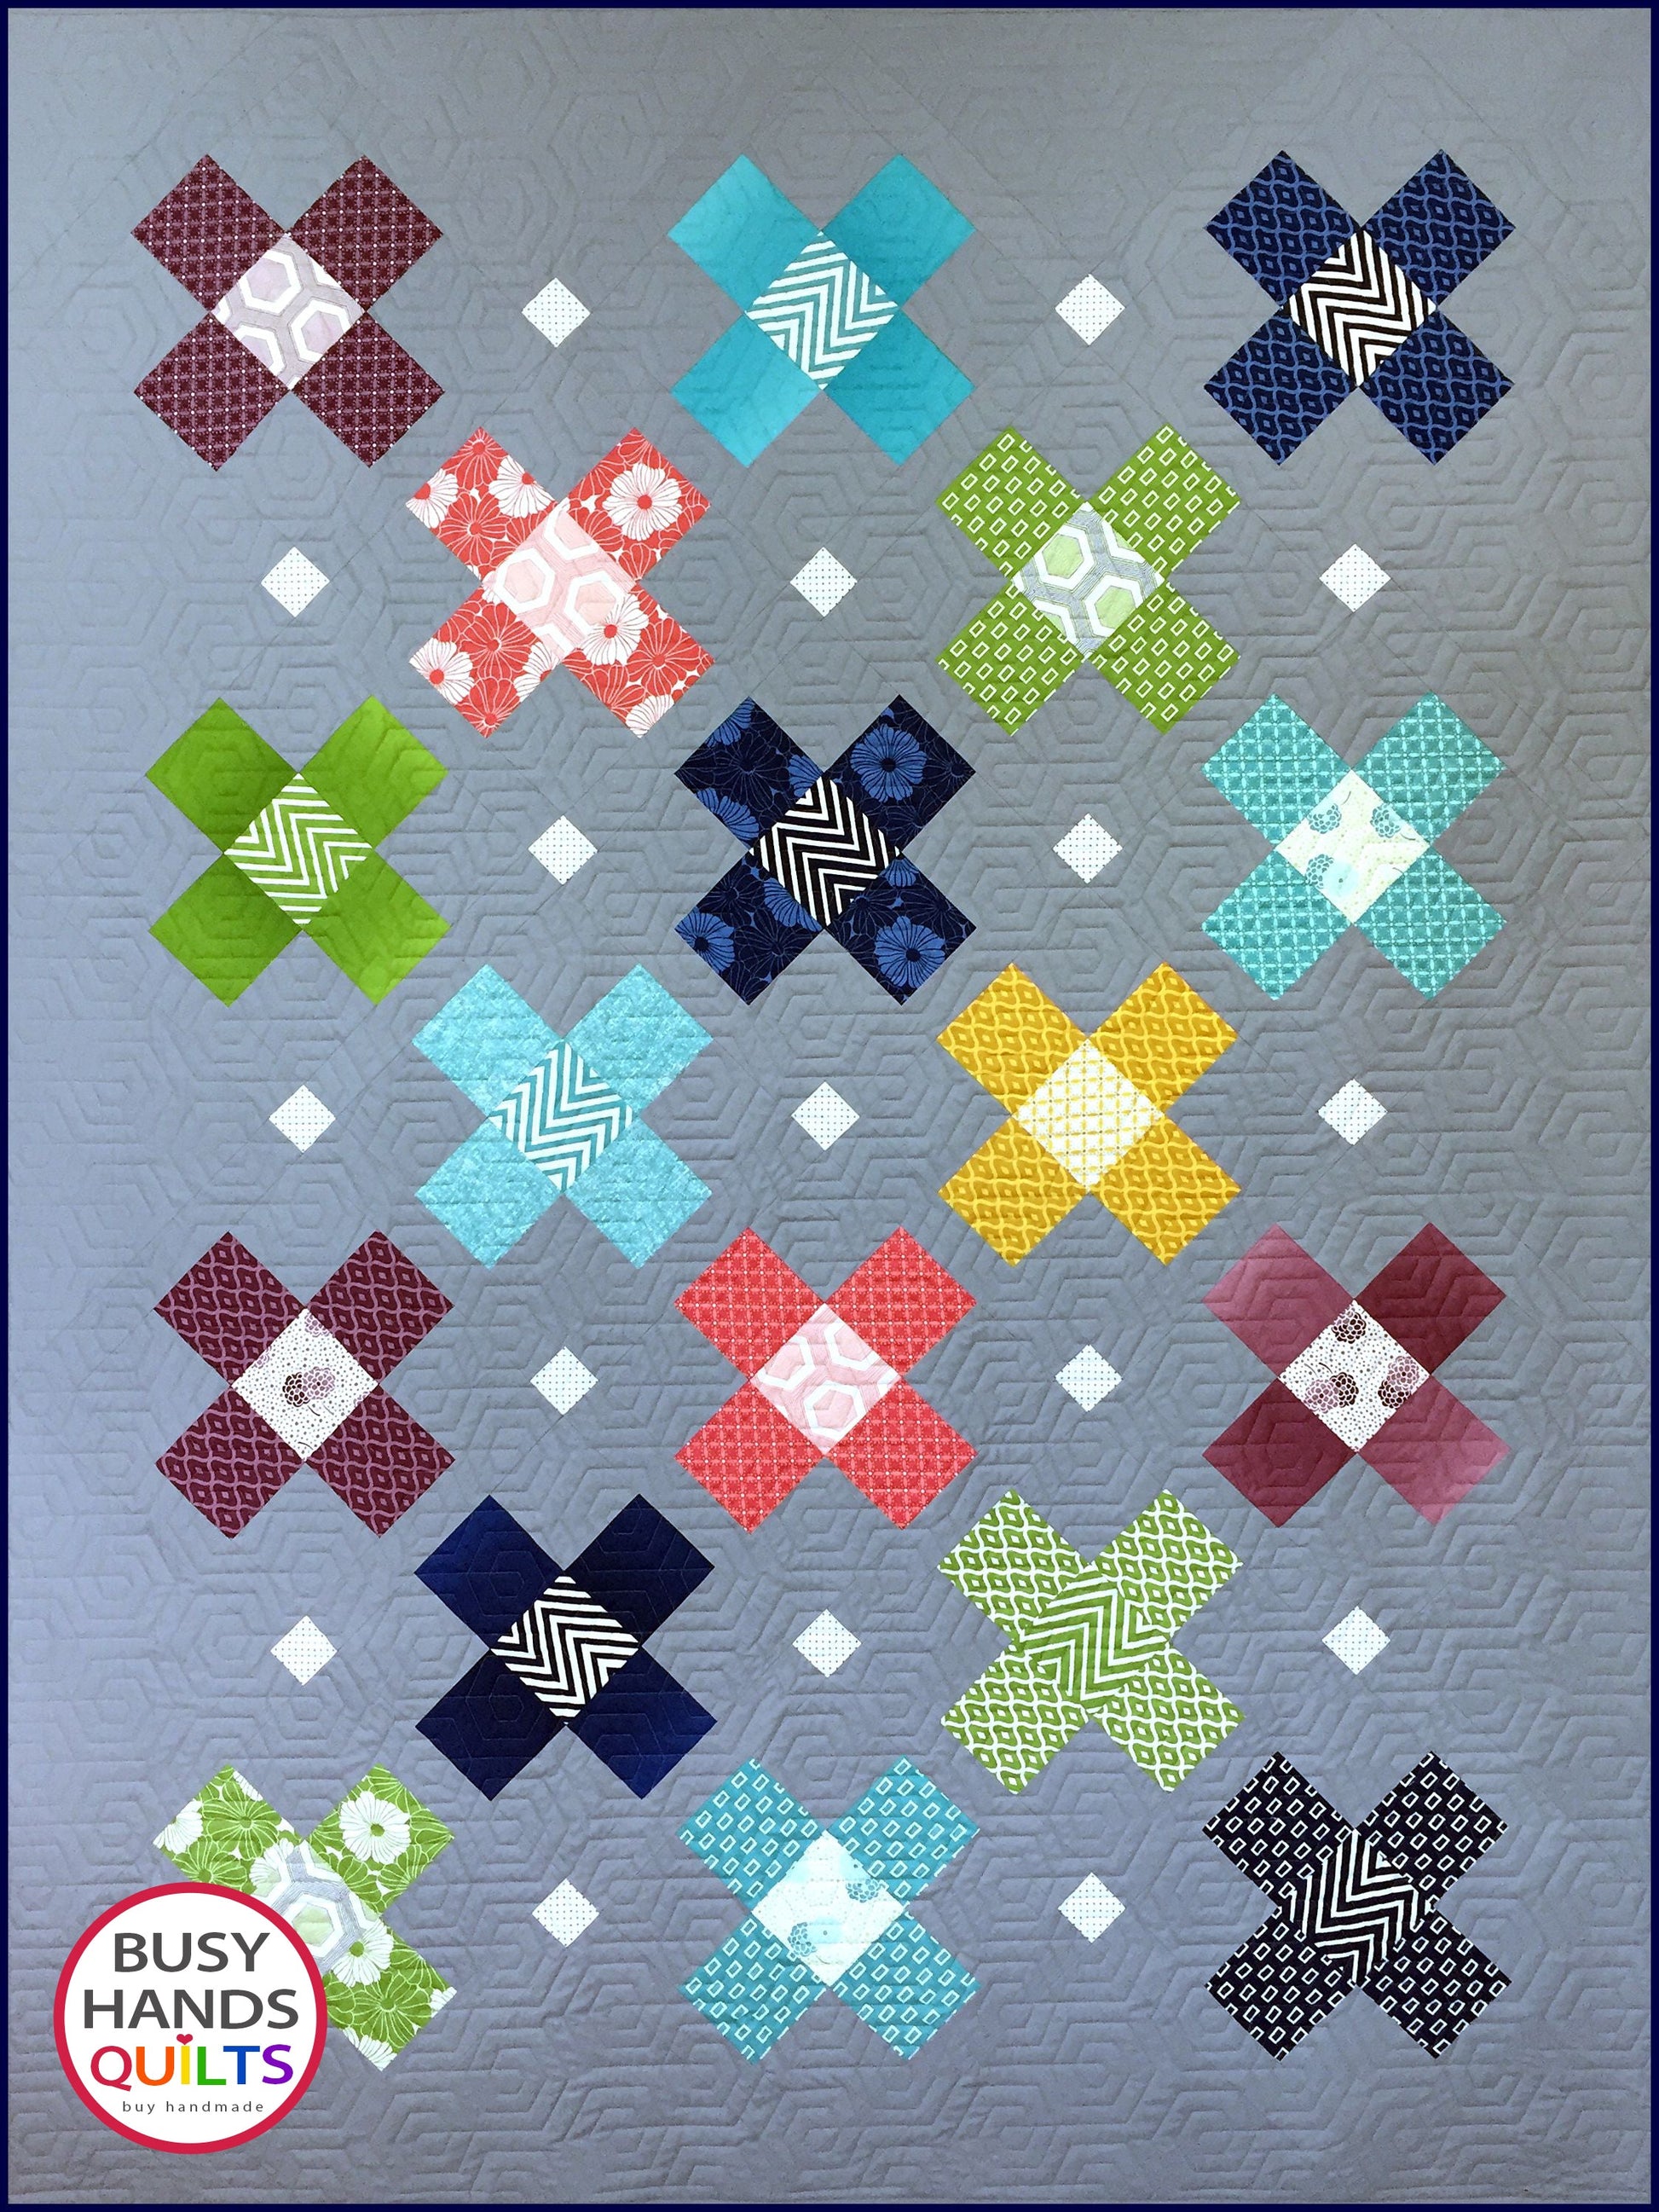 Hometown Quilt Pattern PDF DOWNLOAD Busy Hands Quilts $12.99